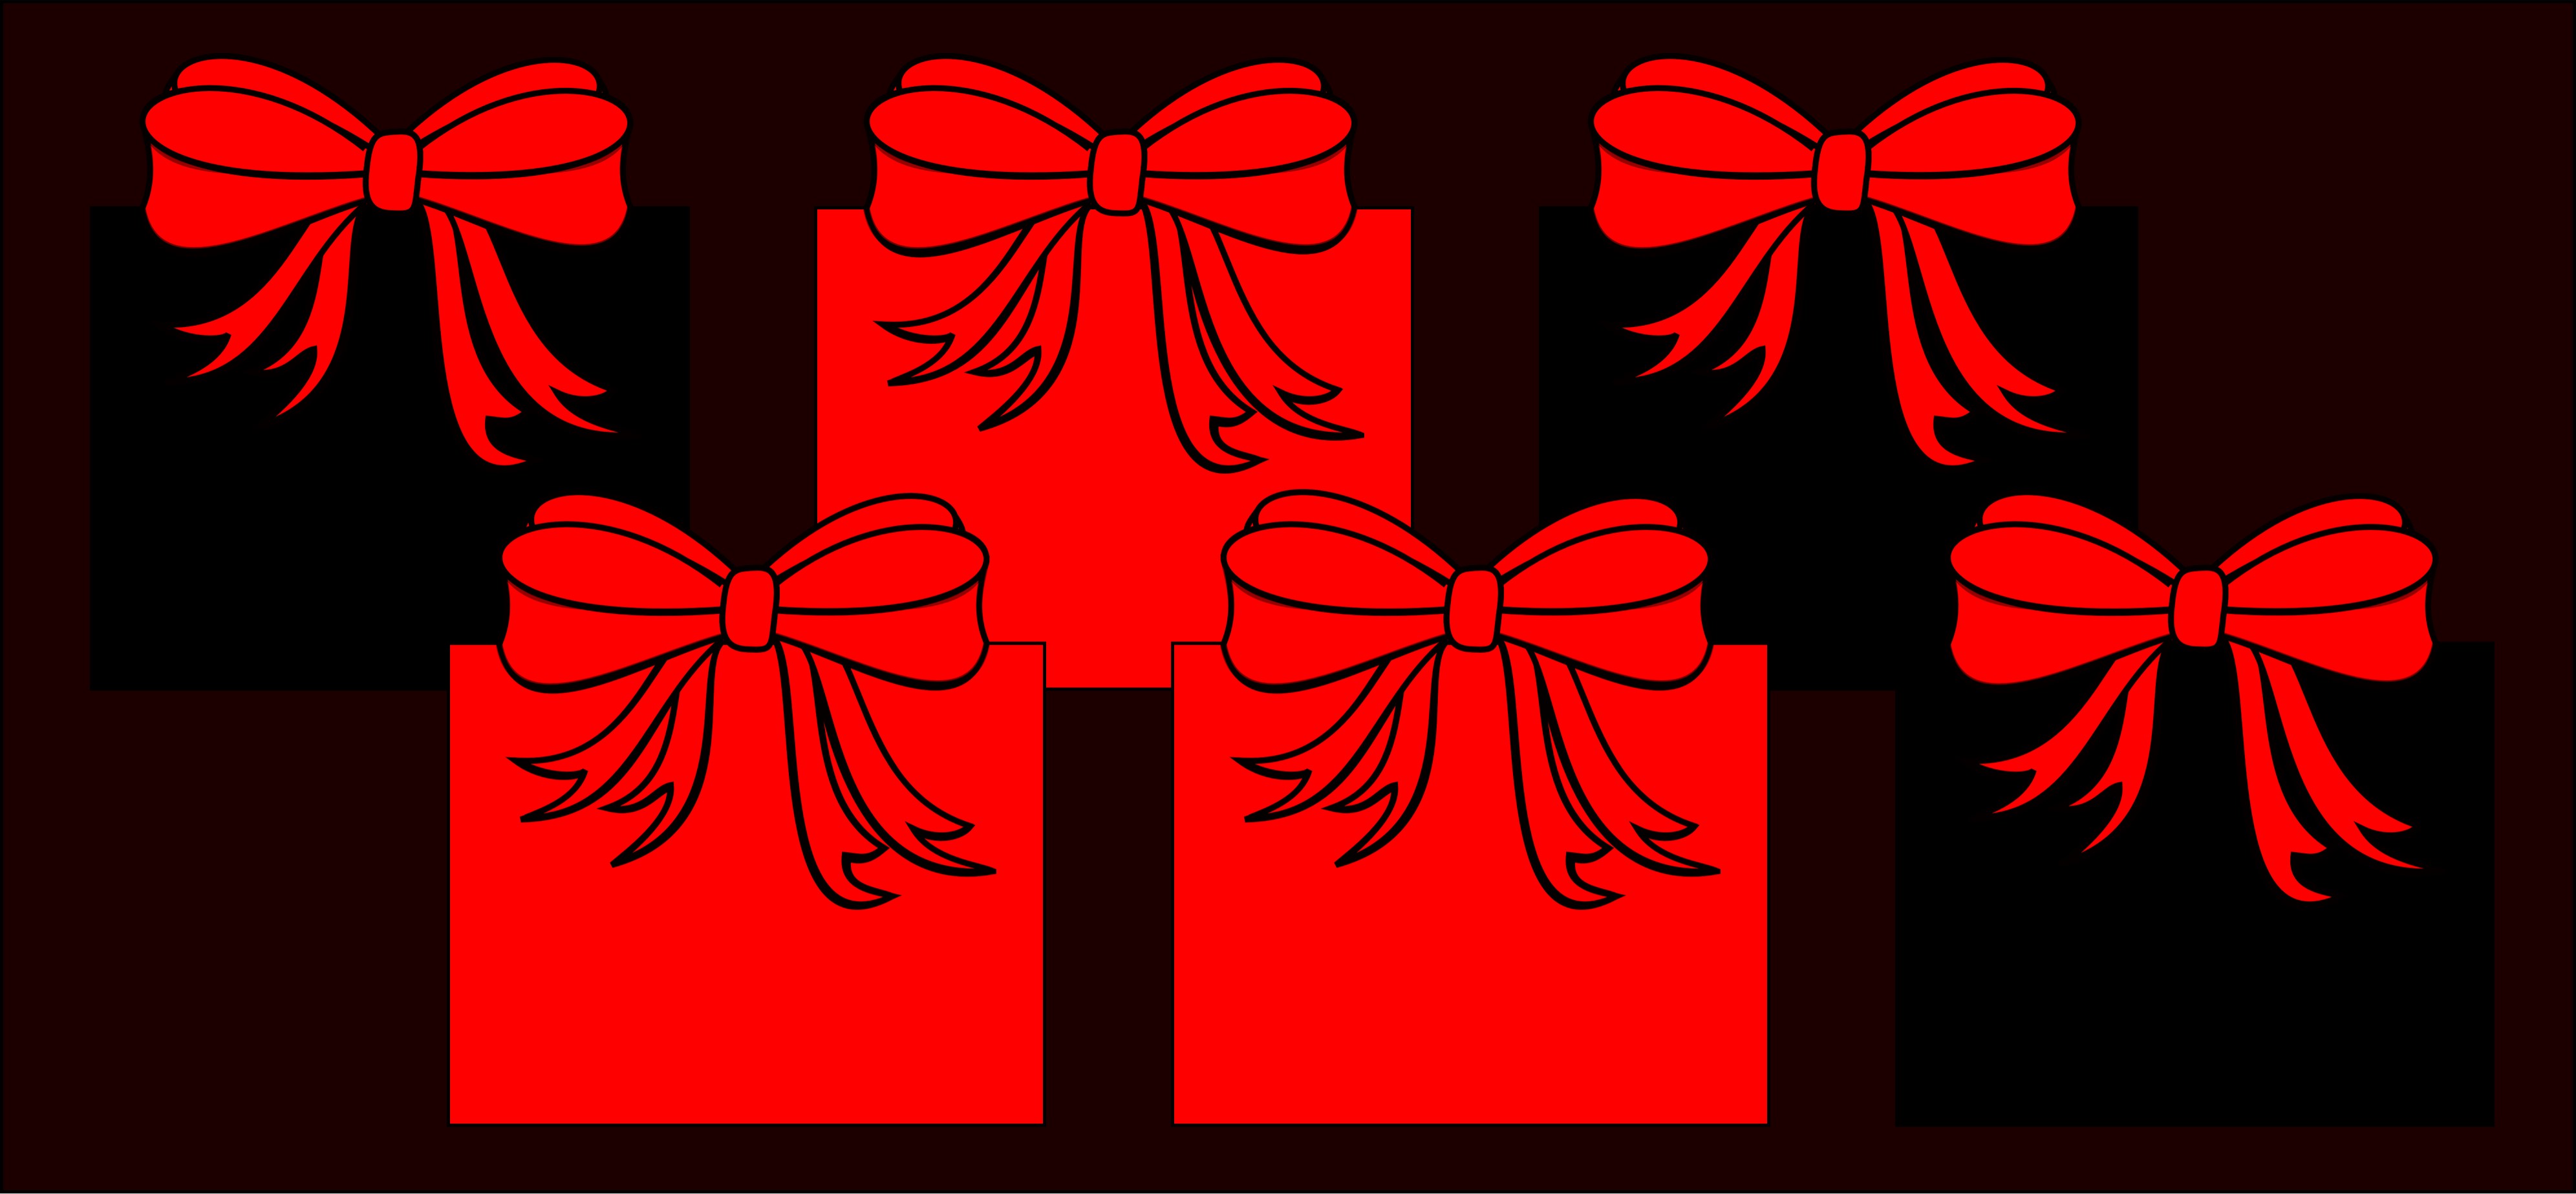 Six presents shown under red light. The top row of 3 presents under red light show as black, red, and black (left to right). The bottom row of 3 presents show as red, red, and black (left to right)